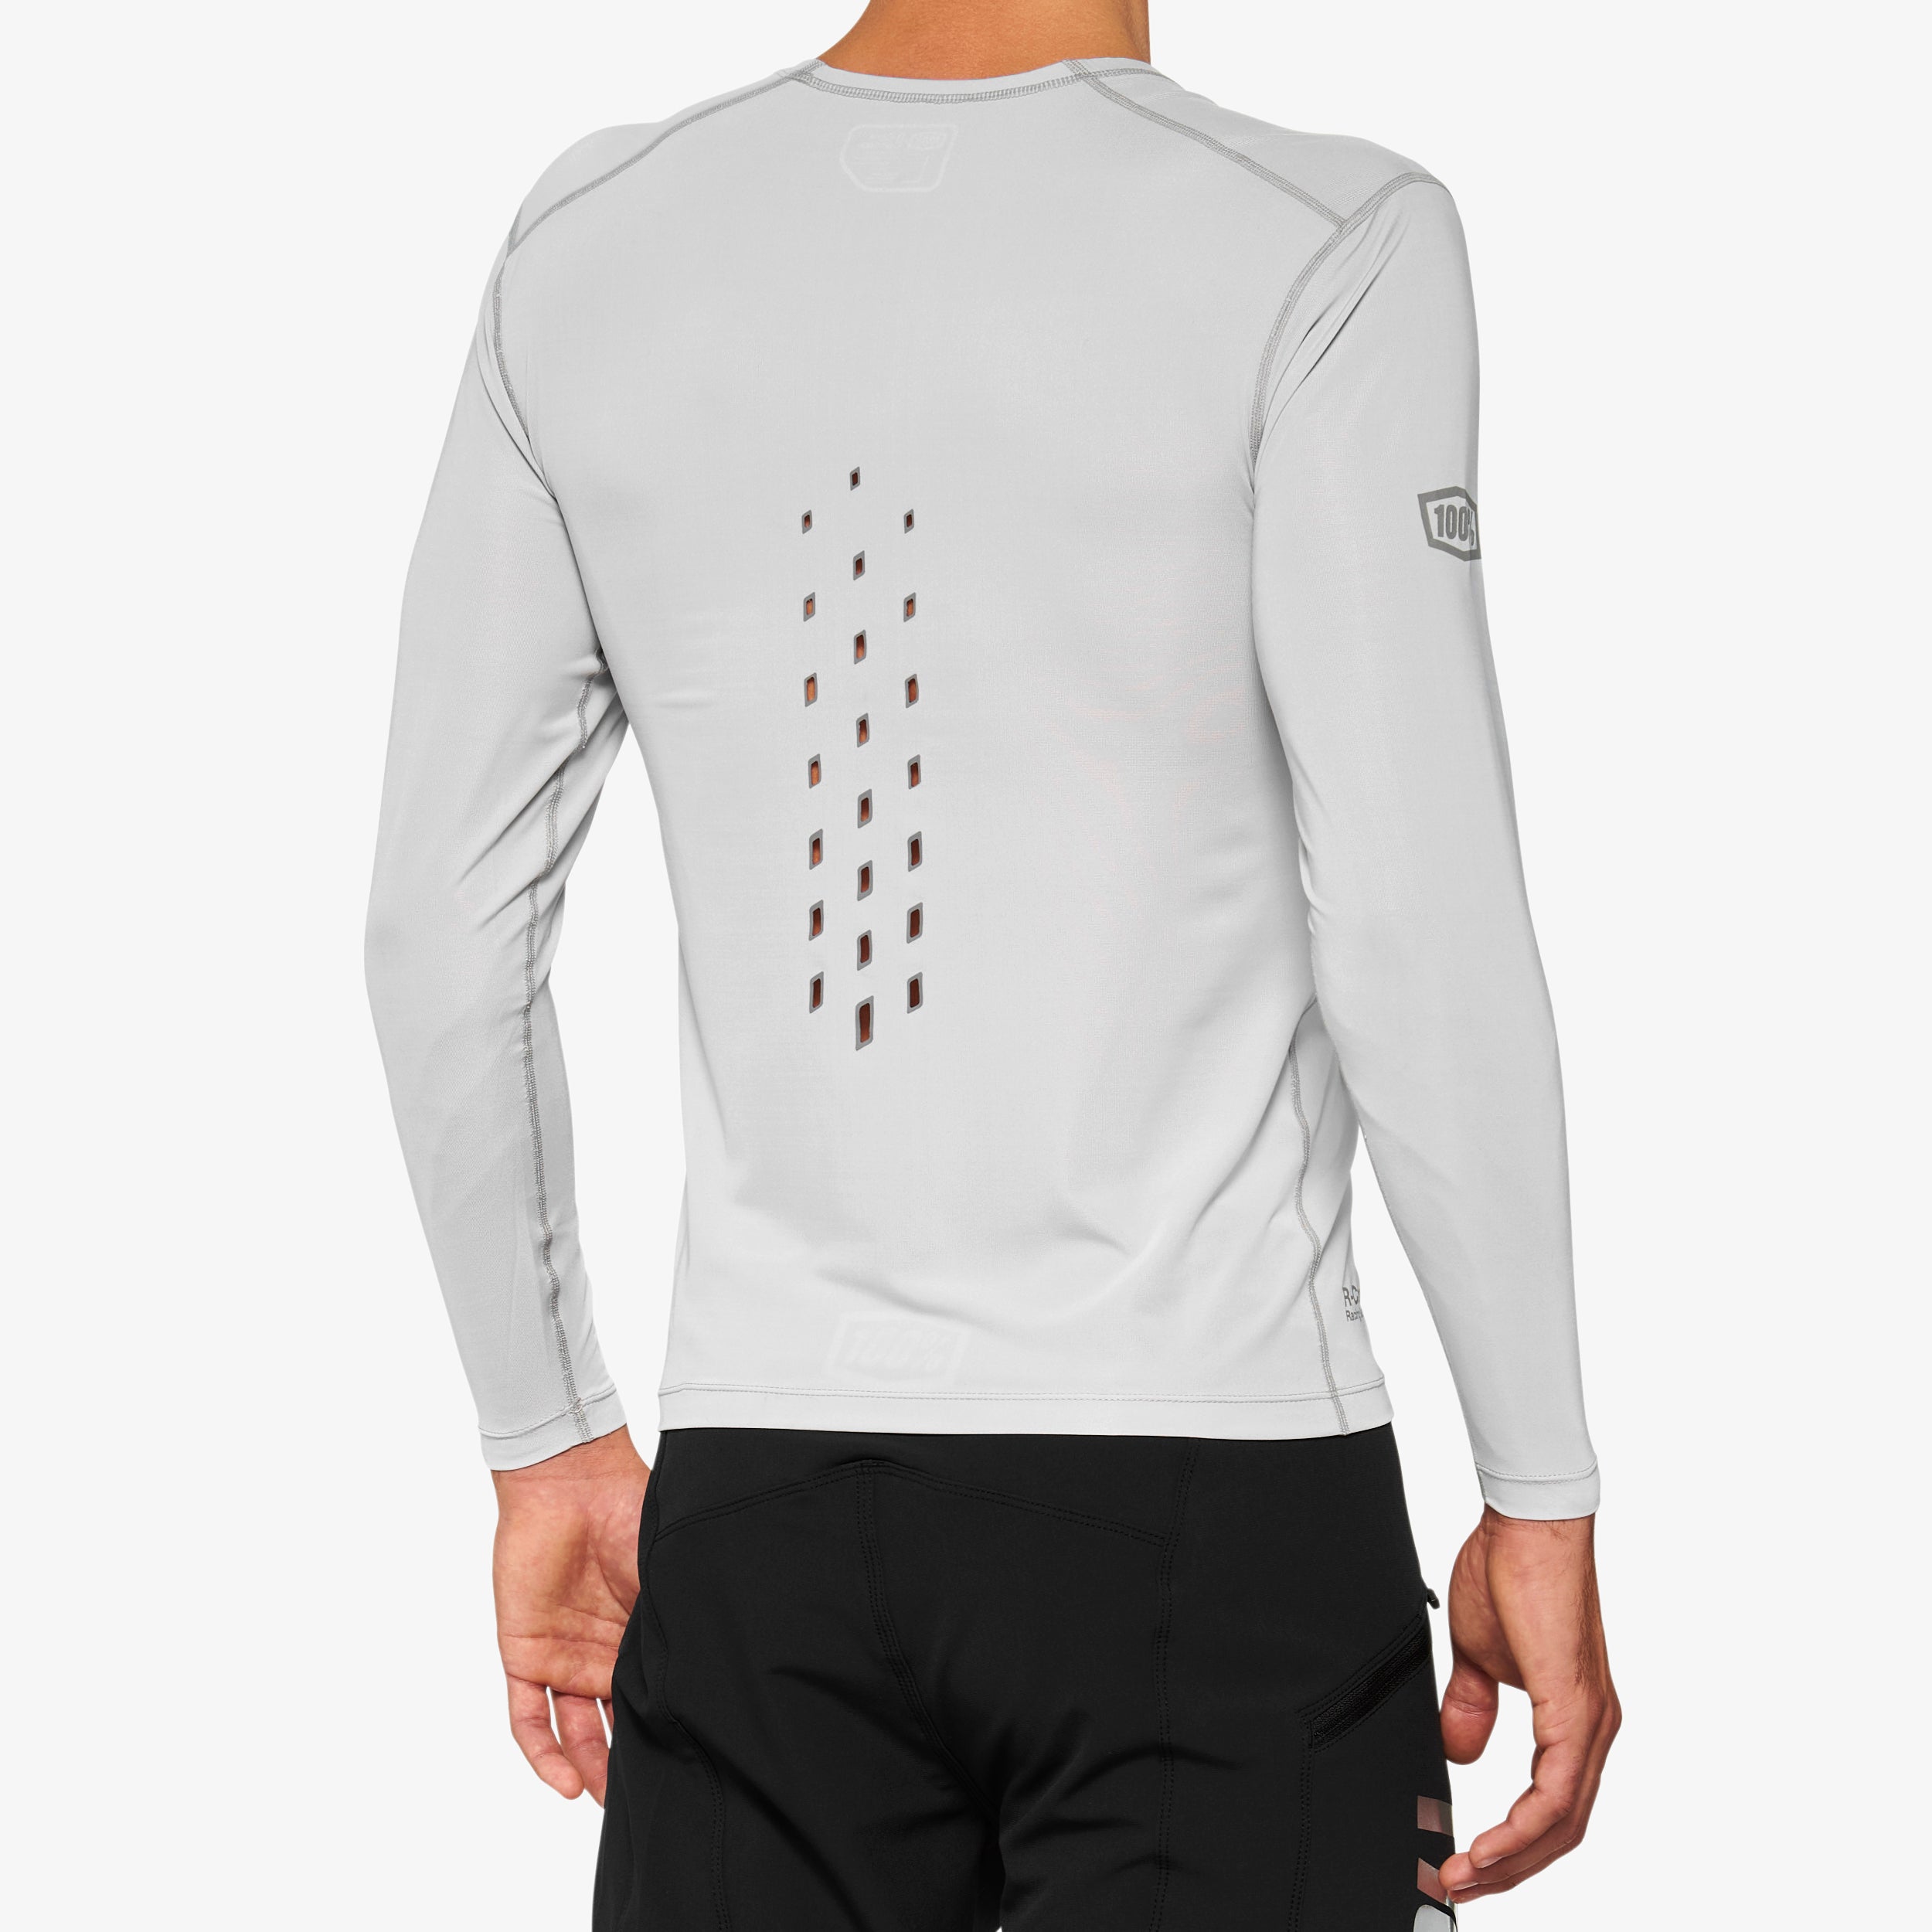 R-CORE CONCEPT Long Sleeve Jersey Grey - Secondary